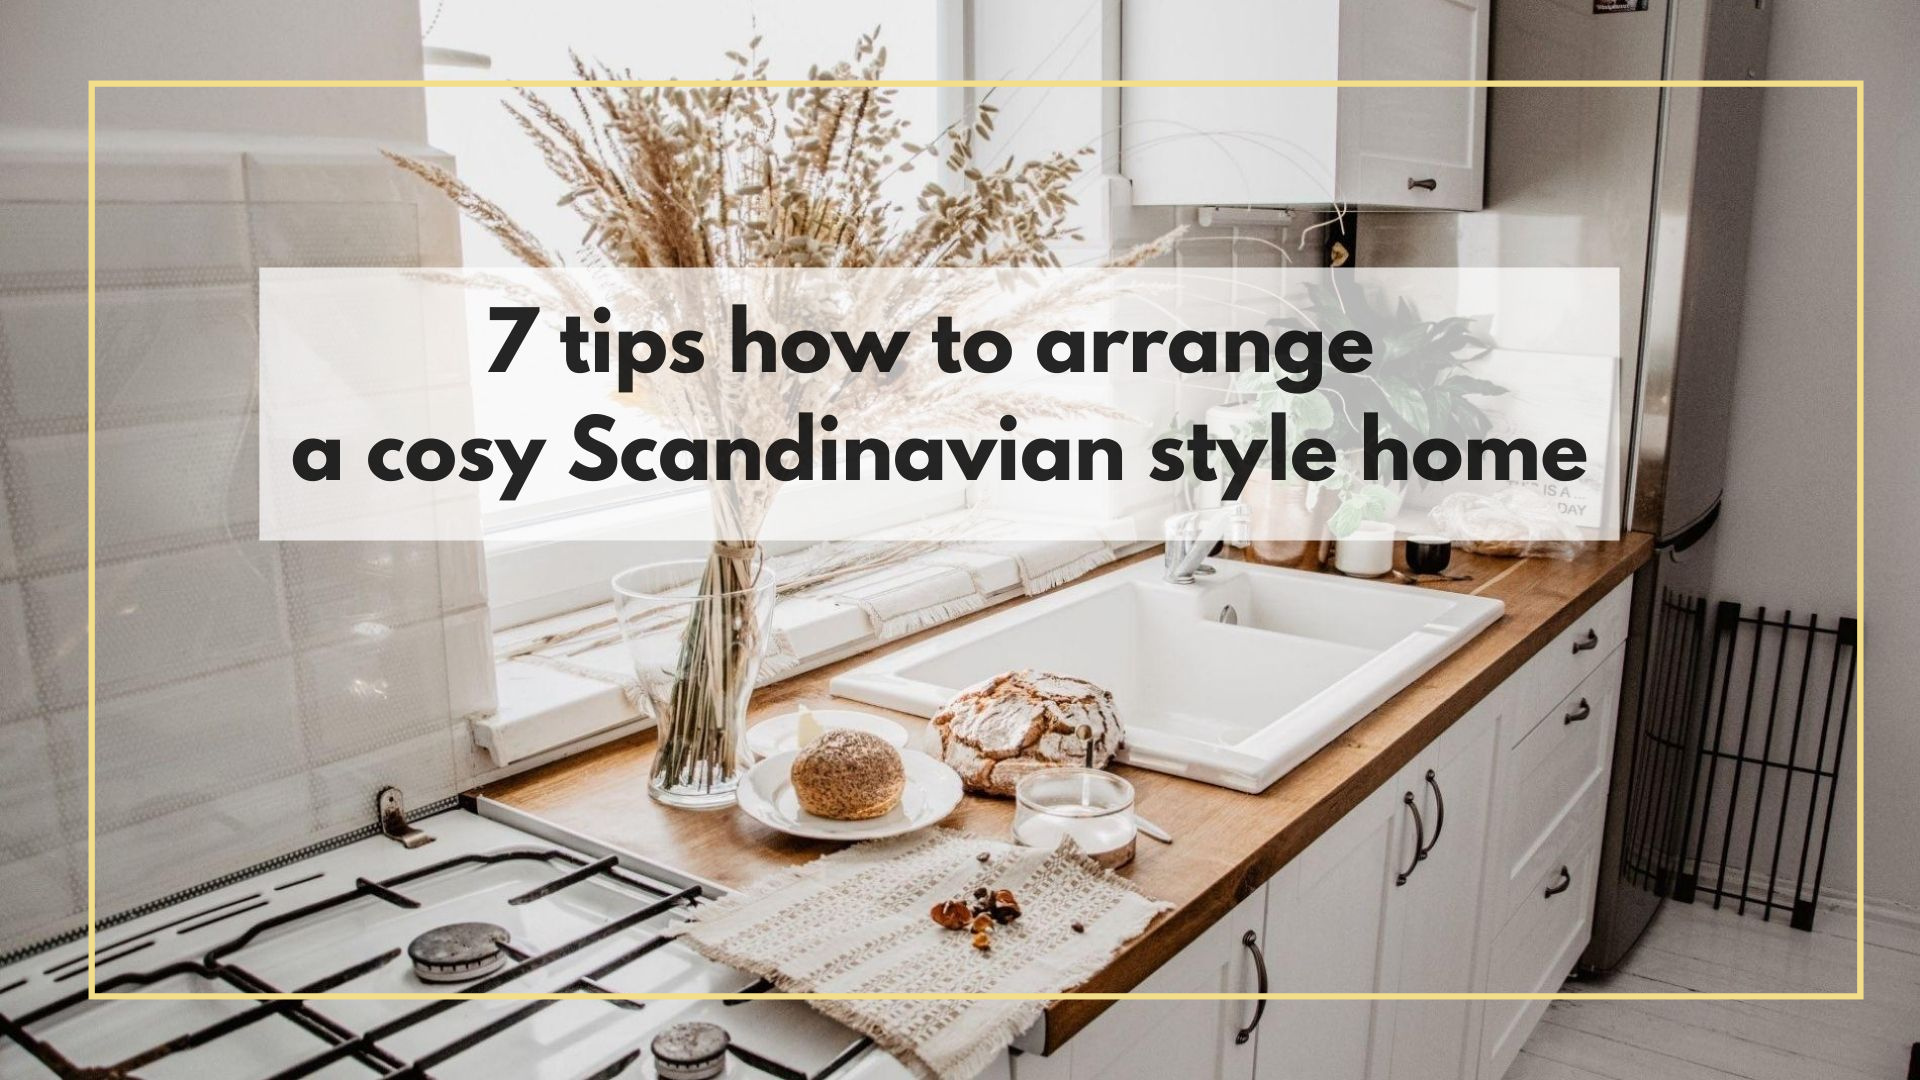 7 tips how to arrange a cosy Scandinavian style home